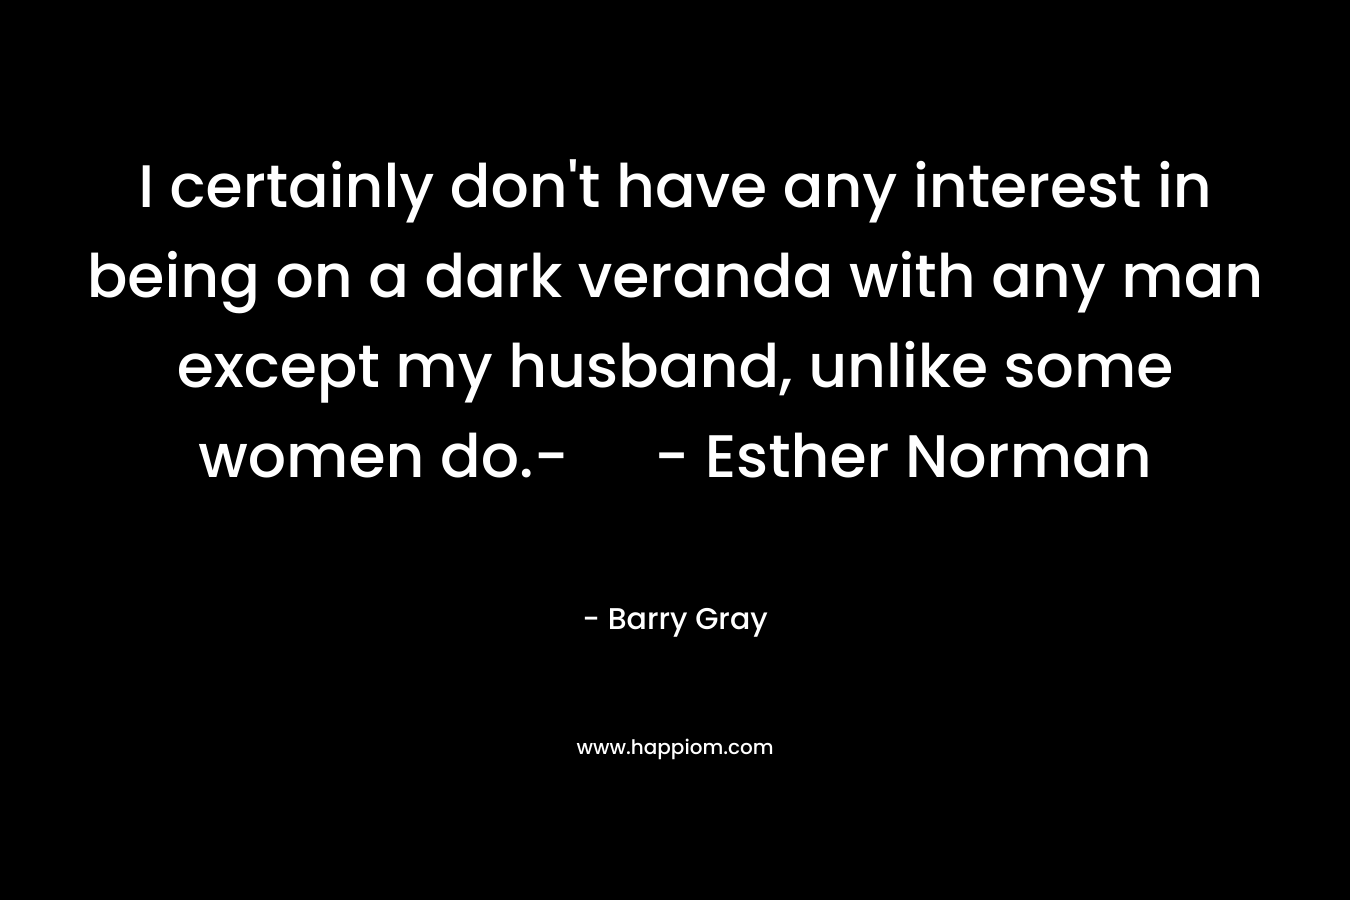 I certainly don't have any interest in being on a dark veranda with any man except my husband, unlike some women do.- - Esther Norman